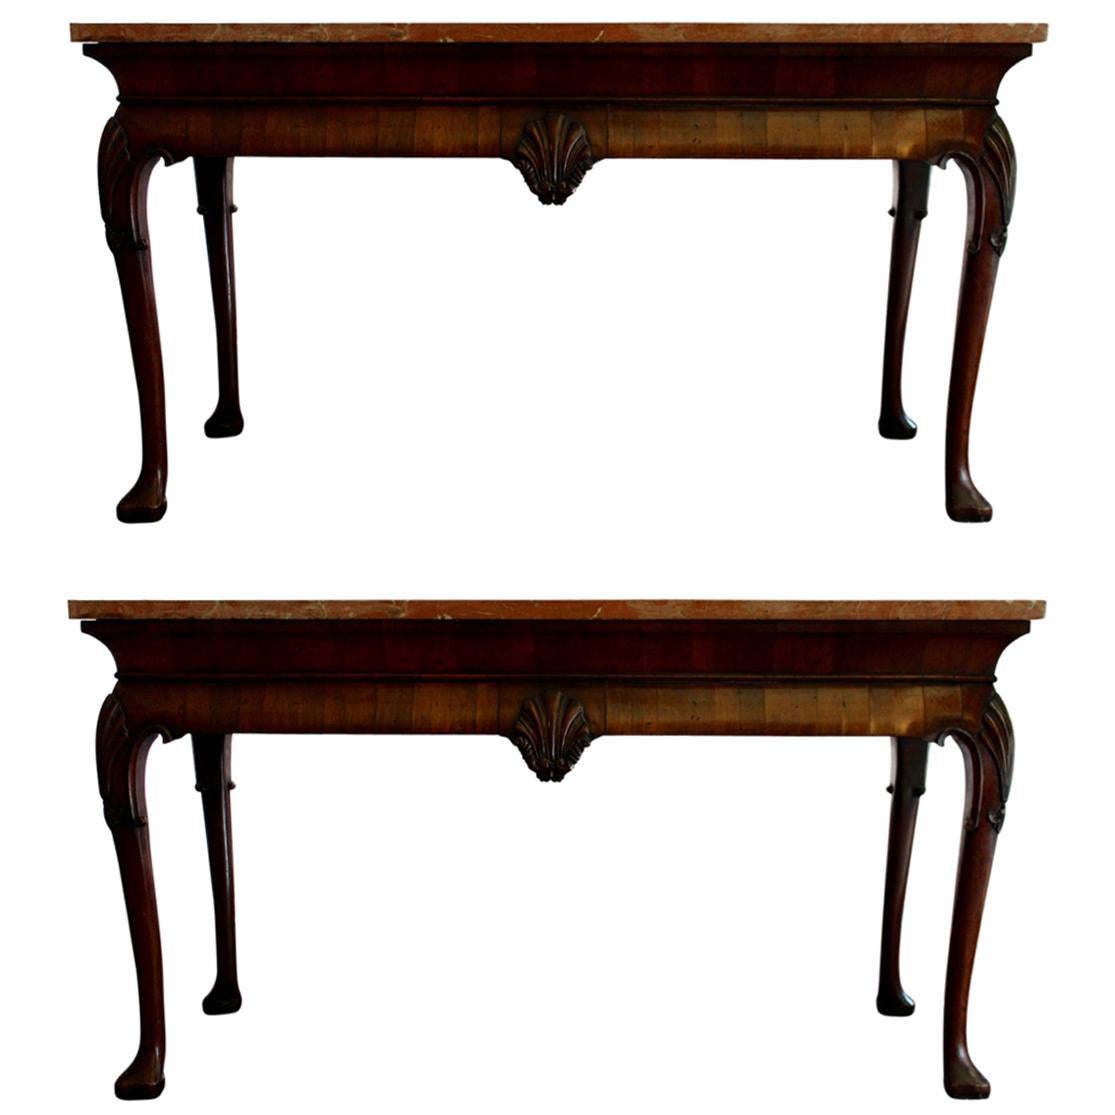 Pair of Rectangular Marble-Topped Walnut Console Tables